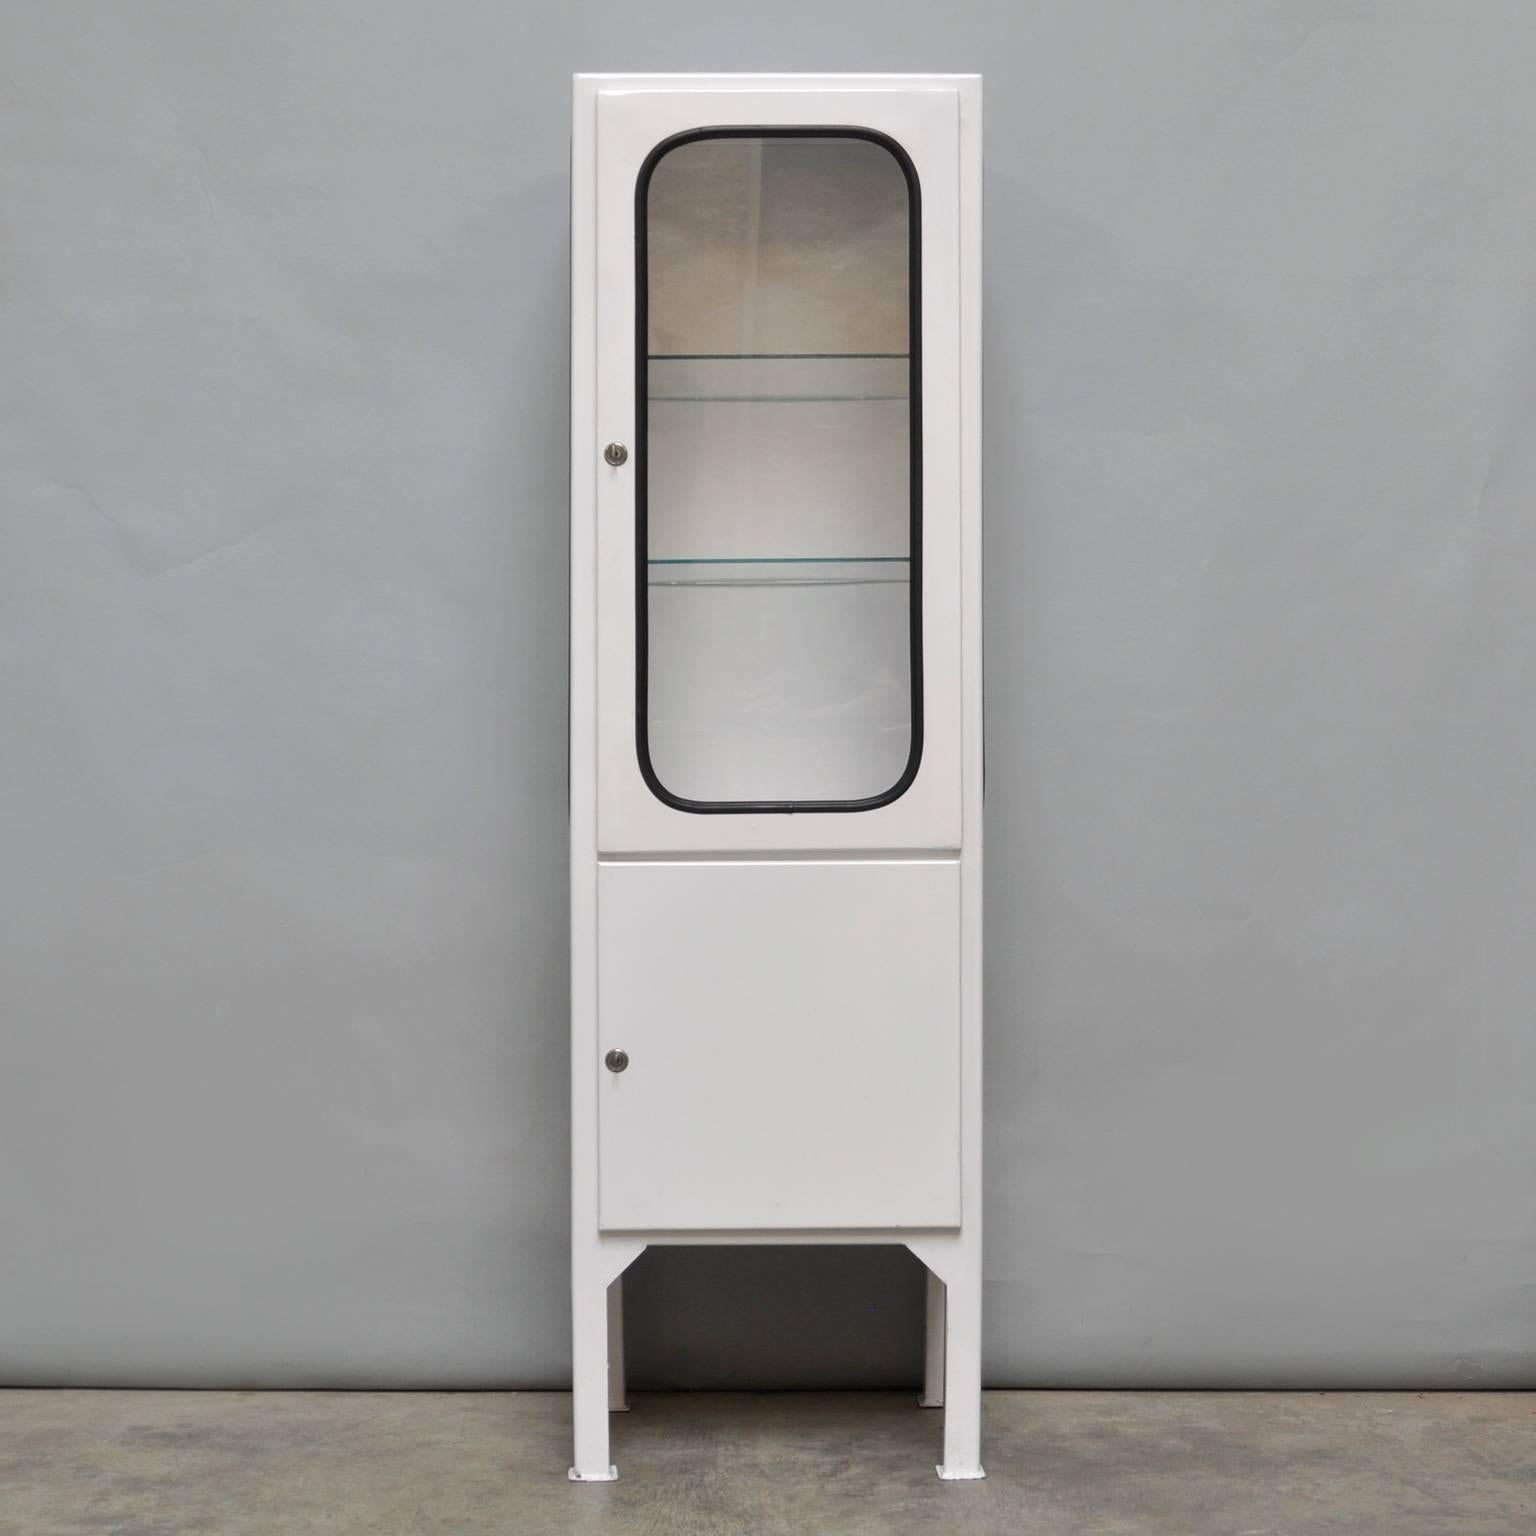 This medicine cabinet was designed in the 1970s and produced in 1975 in Hungary. It is made from steel and glass, with the glass panes held in place by a black rubber strip. The cabinet features two adjustable glass shelves and a functioning locks.